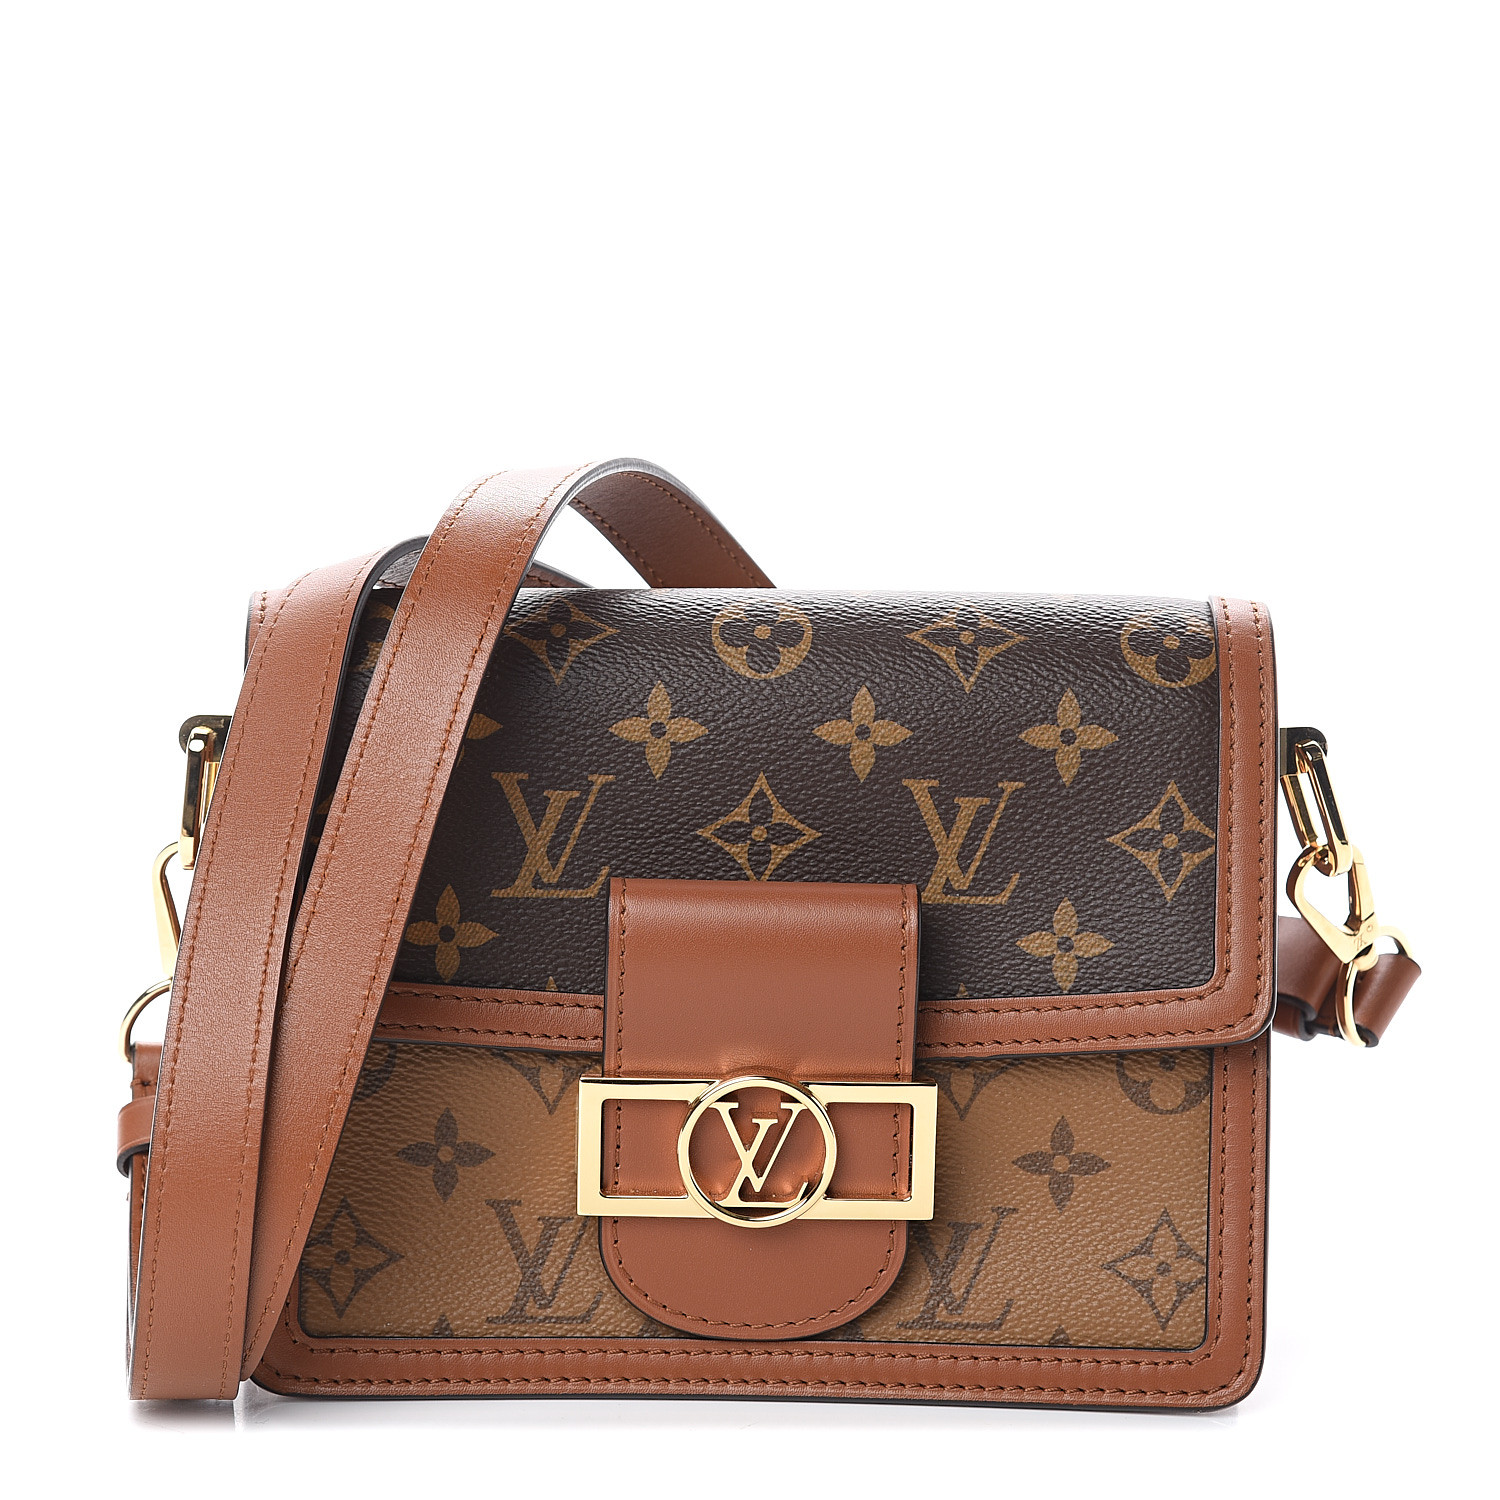 Is it worth it? Louis Vuitton MINI DAUPHINE Pros & Cons/ Chanel LV